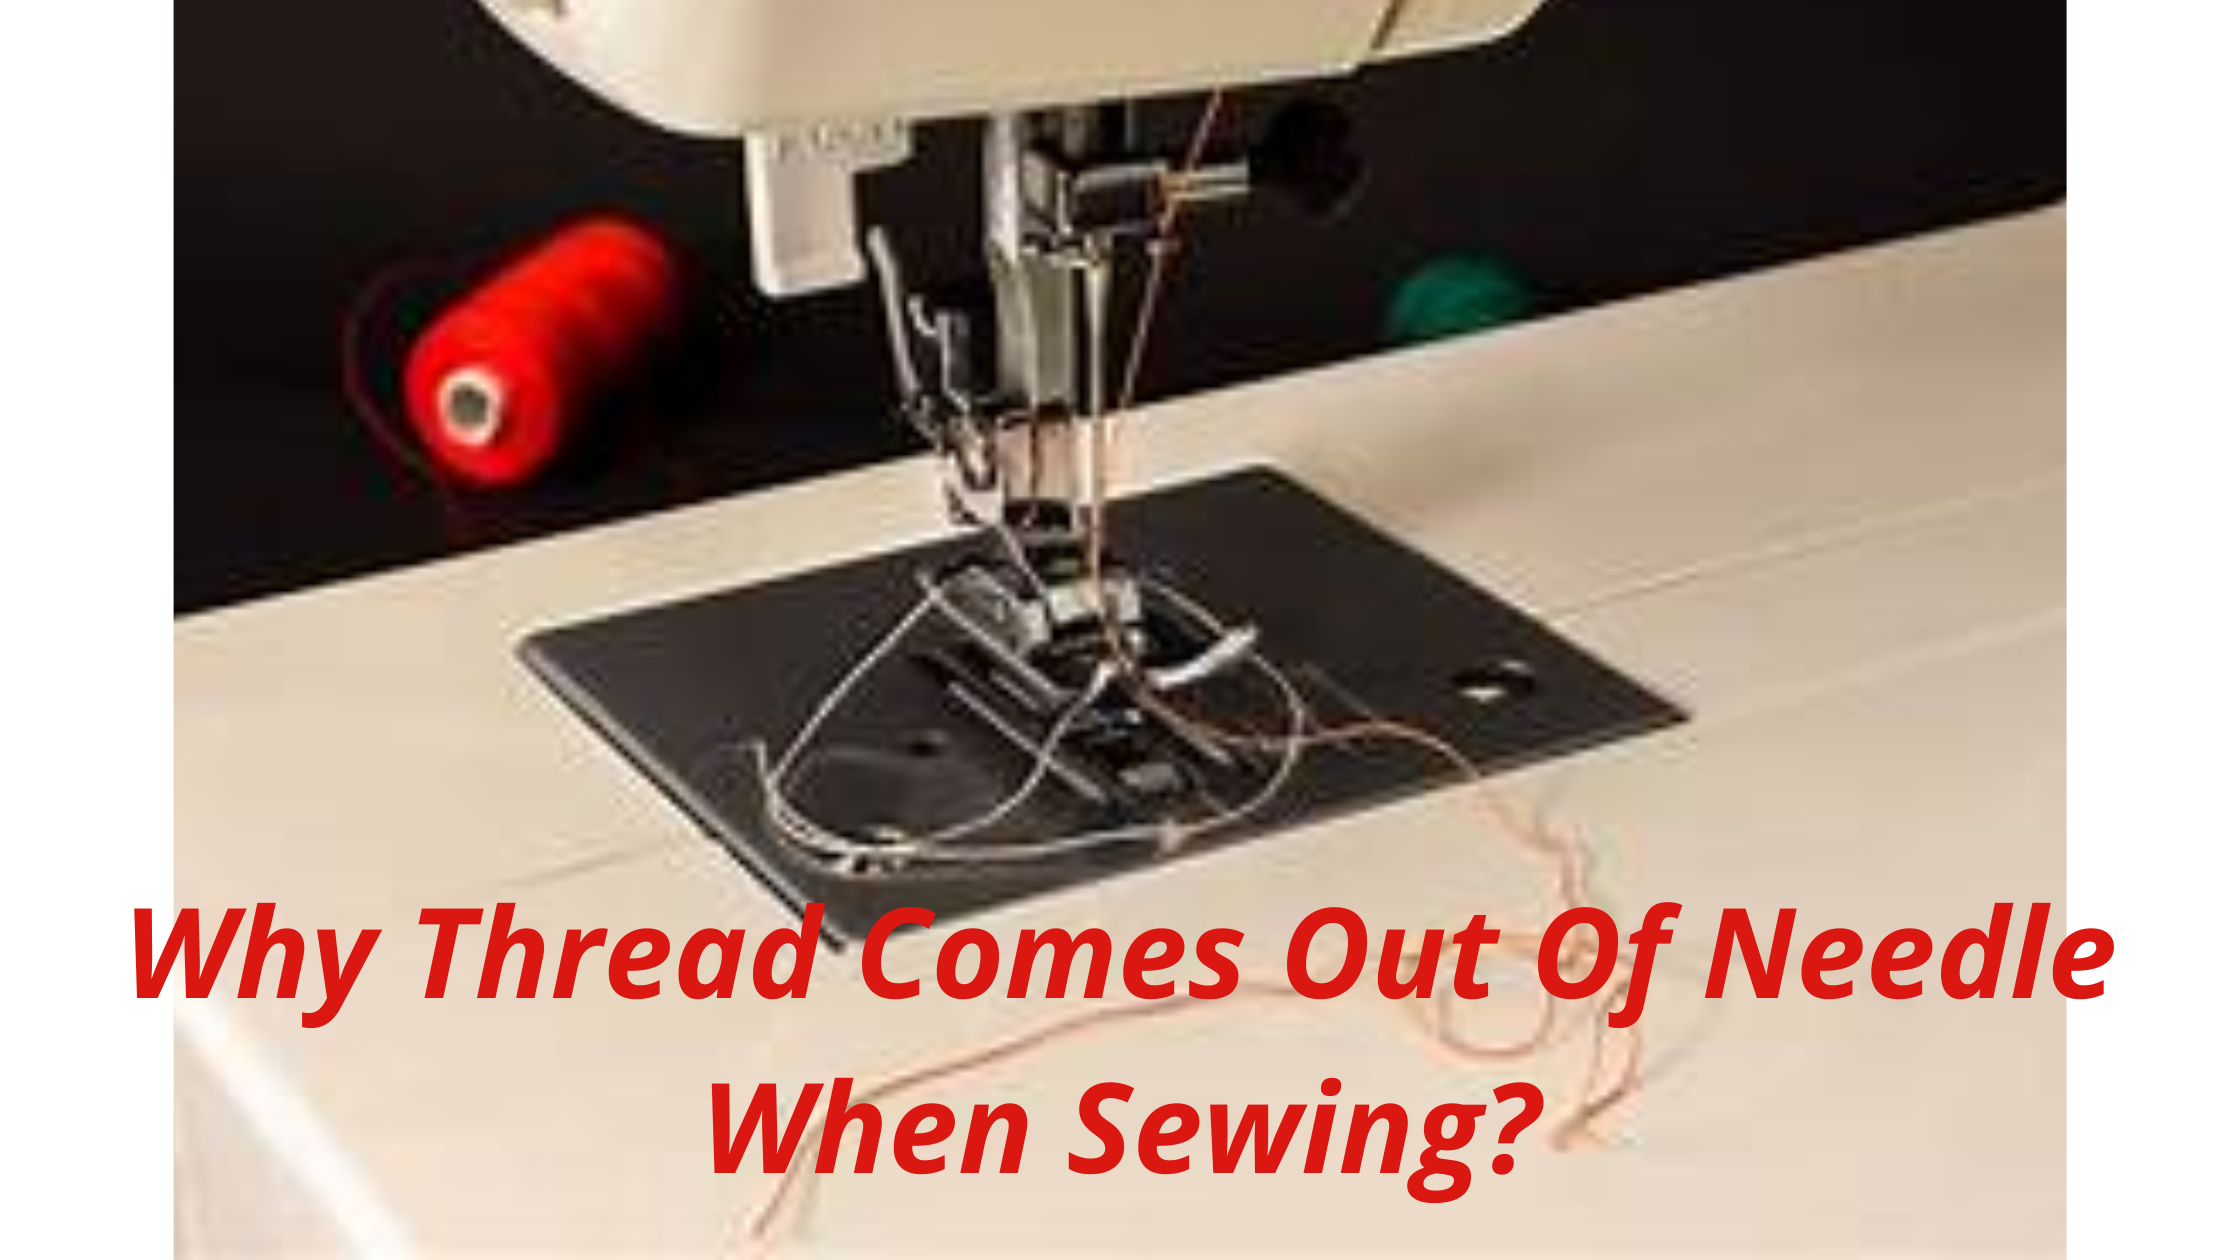 Why Thread Comes Out Of Needle When Sewing?